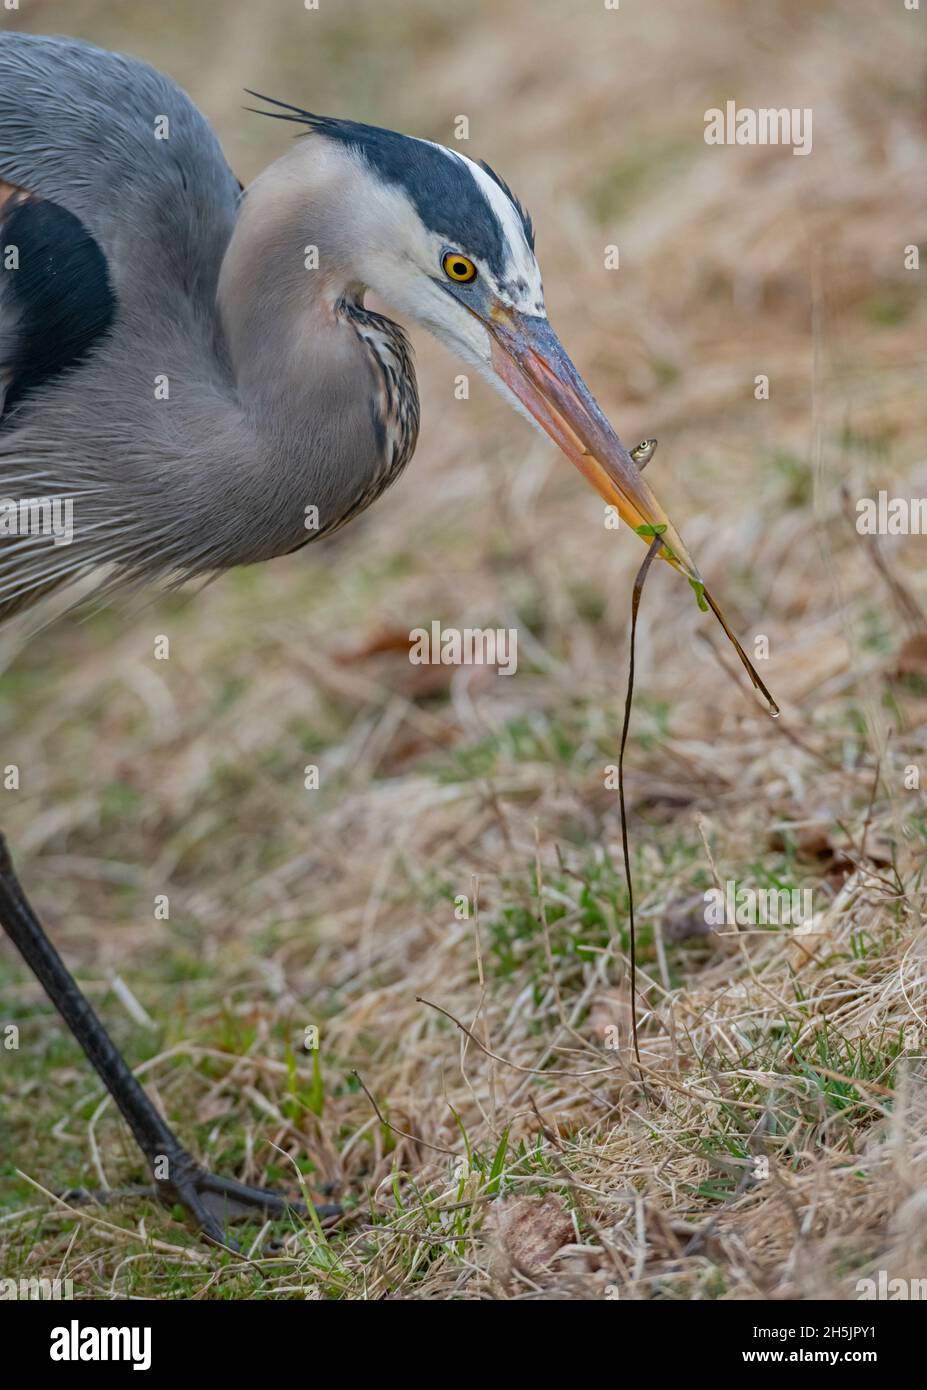 Mature Great Blue Heron (Ardea herodias) with captured fish. Early spring in Acadia National Park, Maine, USA. Stock Photo